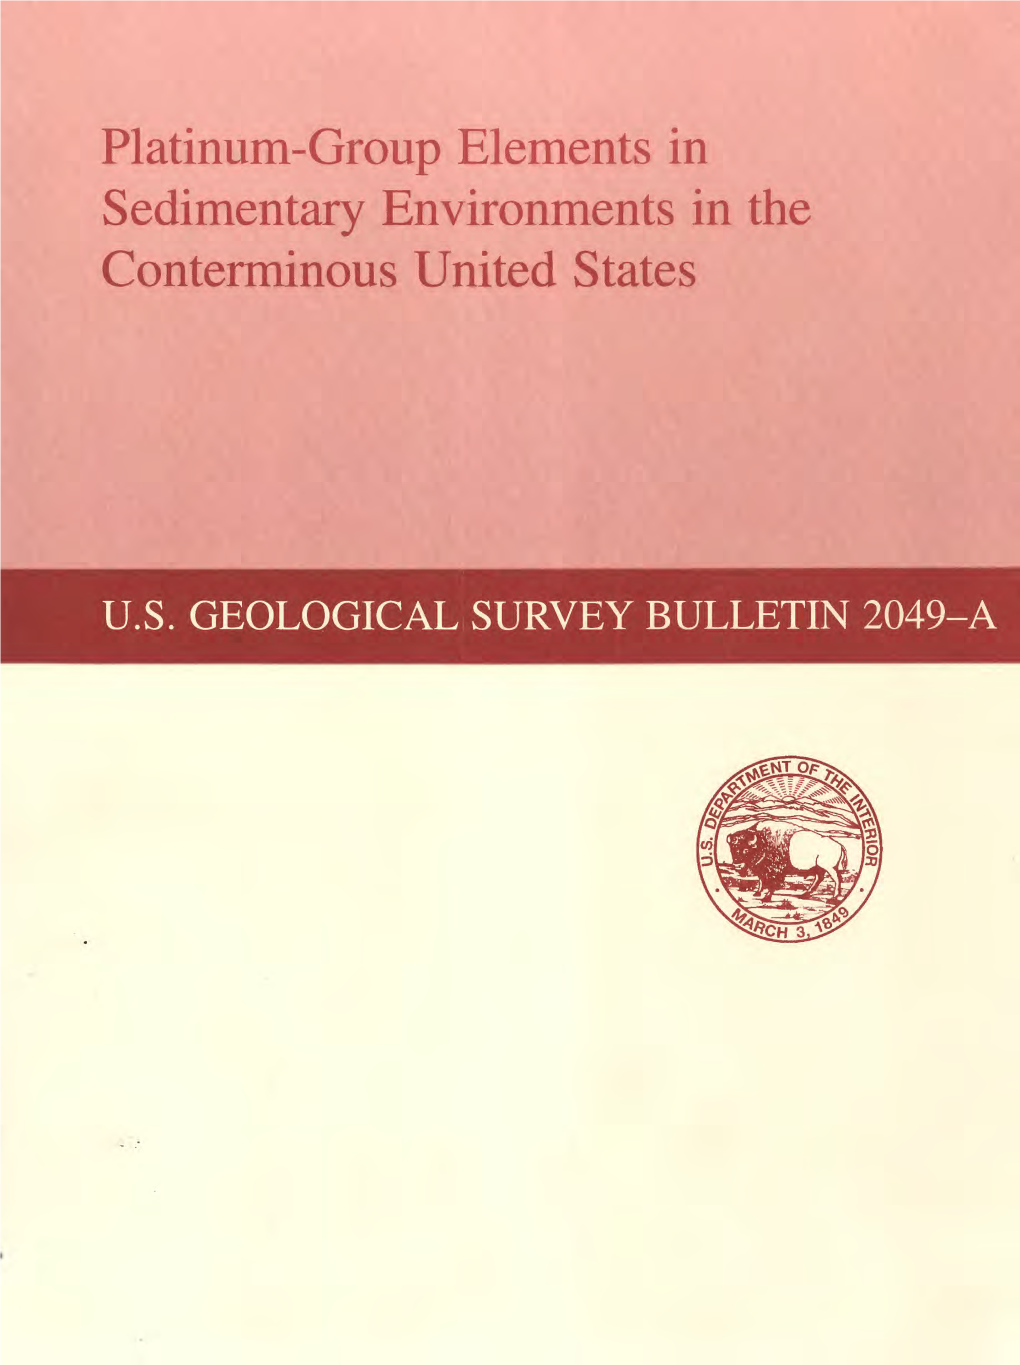 Platinum-Group Elements in Sedimentary Environments in the Conterminous United States